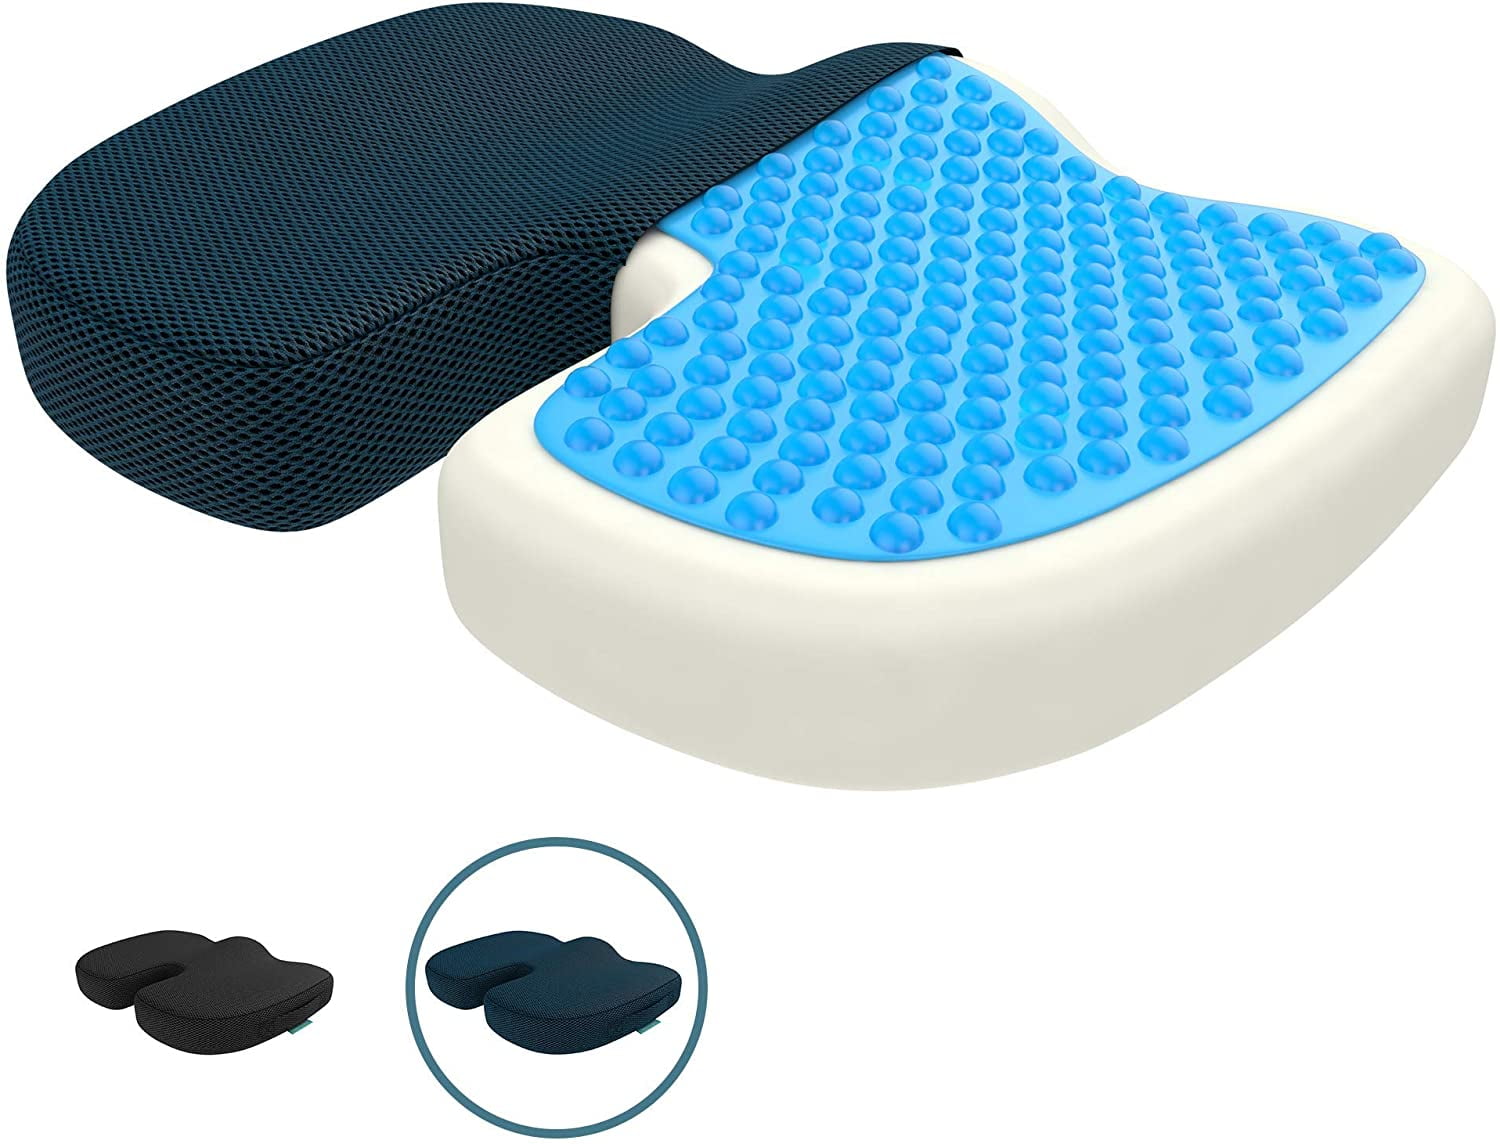 Office Chair Car Cushion Reinforcement Pad Breathable mesh Blue Sciatica/Back Pain Cushion Anti-Slip Orthopedic Gel and Memory Foam Pad to Relieve Tailbone Pain 